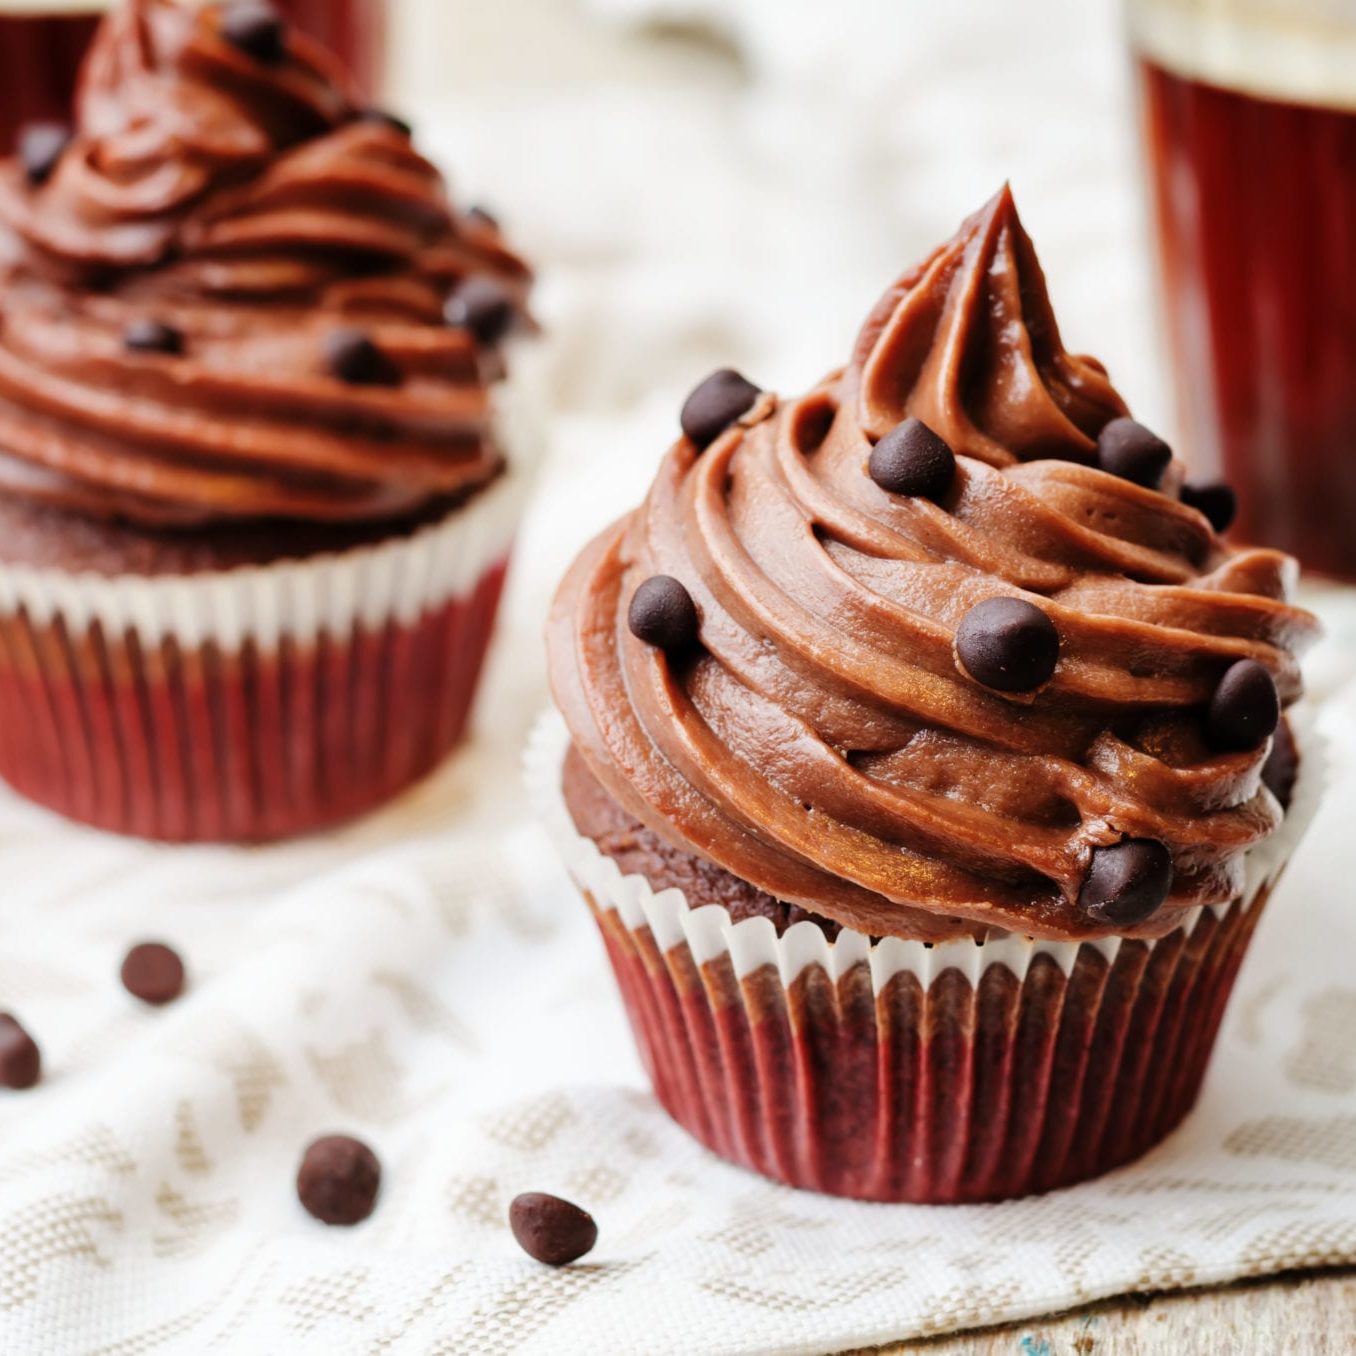 chocolate cupcakes with chocolate frosting and chocolate chips. the toning. selective focus